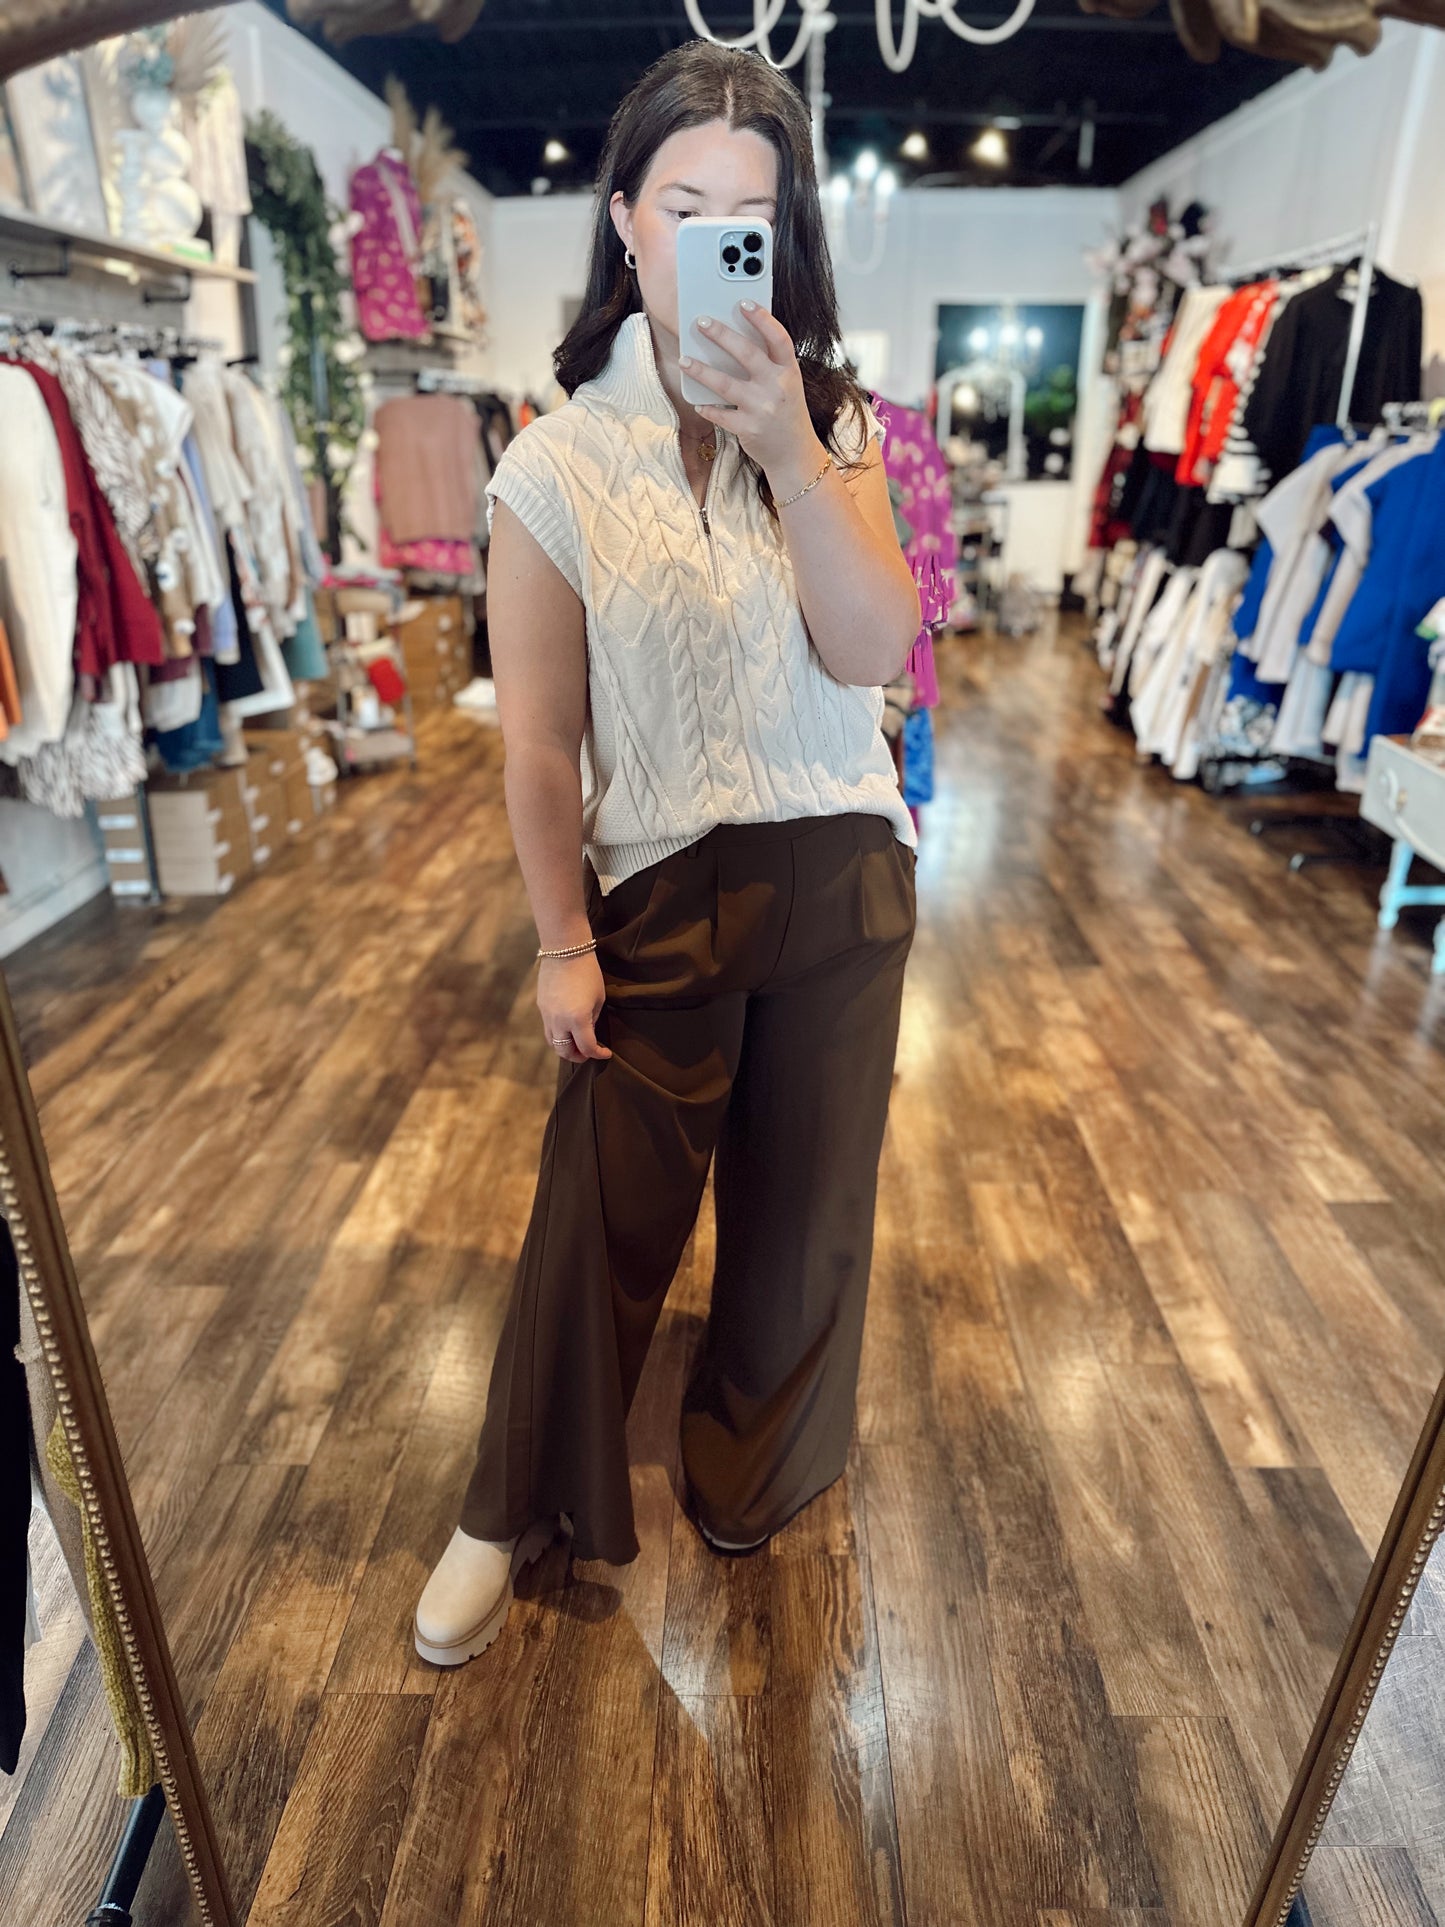 Fall About Brown Trouser Pants